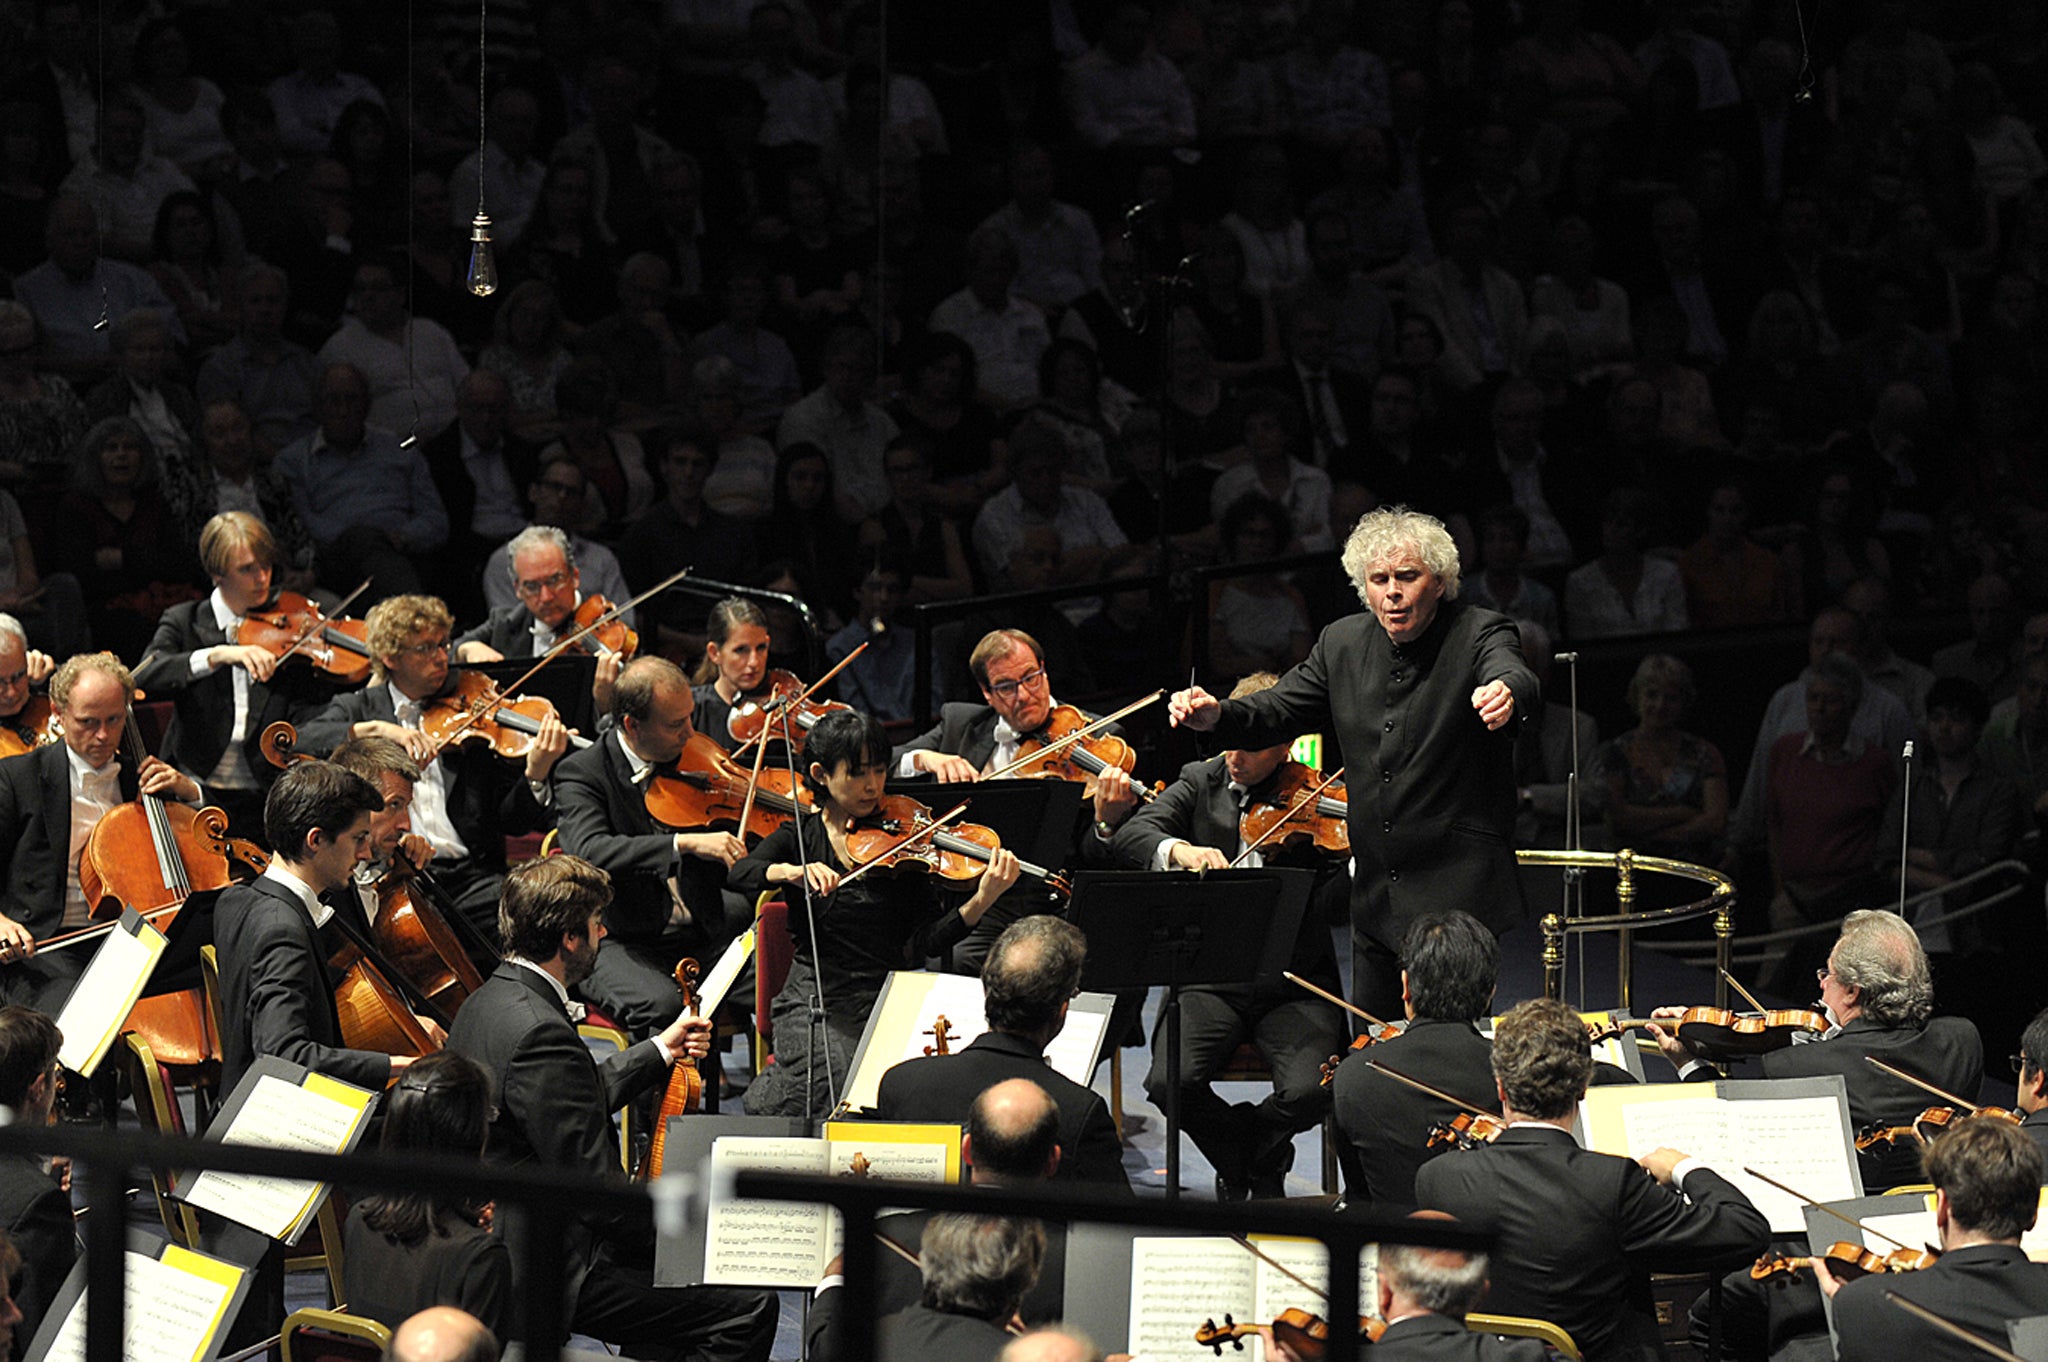 Sir Simon Rattle conducts the Berliner Philharmoniker at the BBC Proms 2014